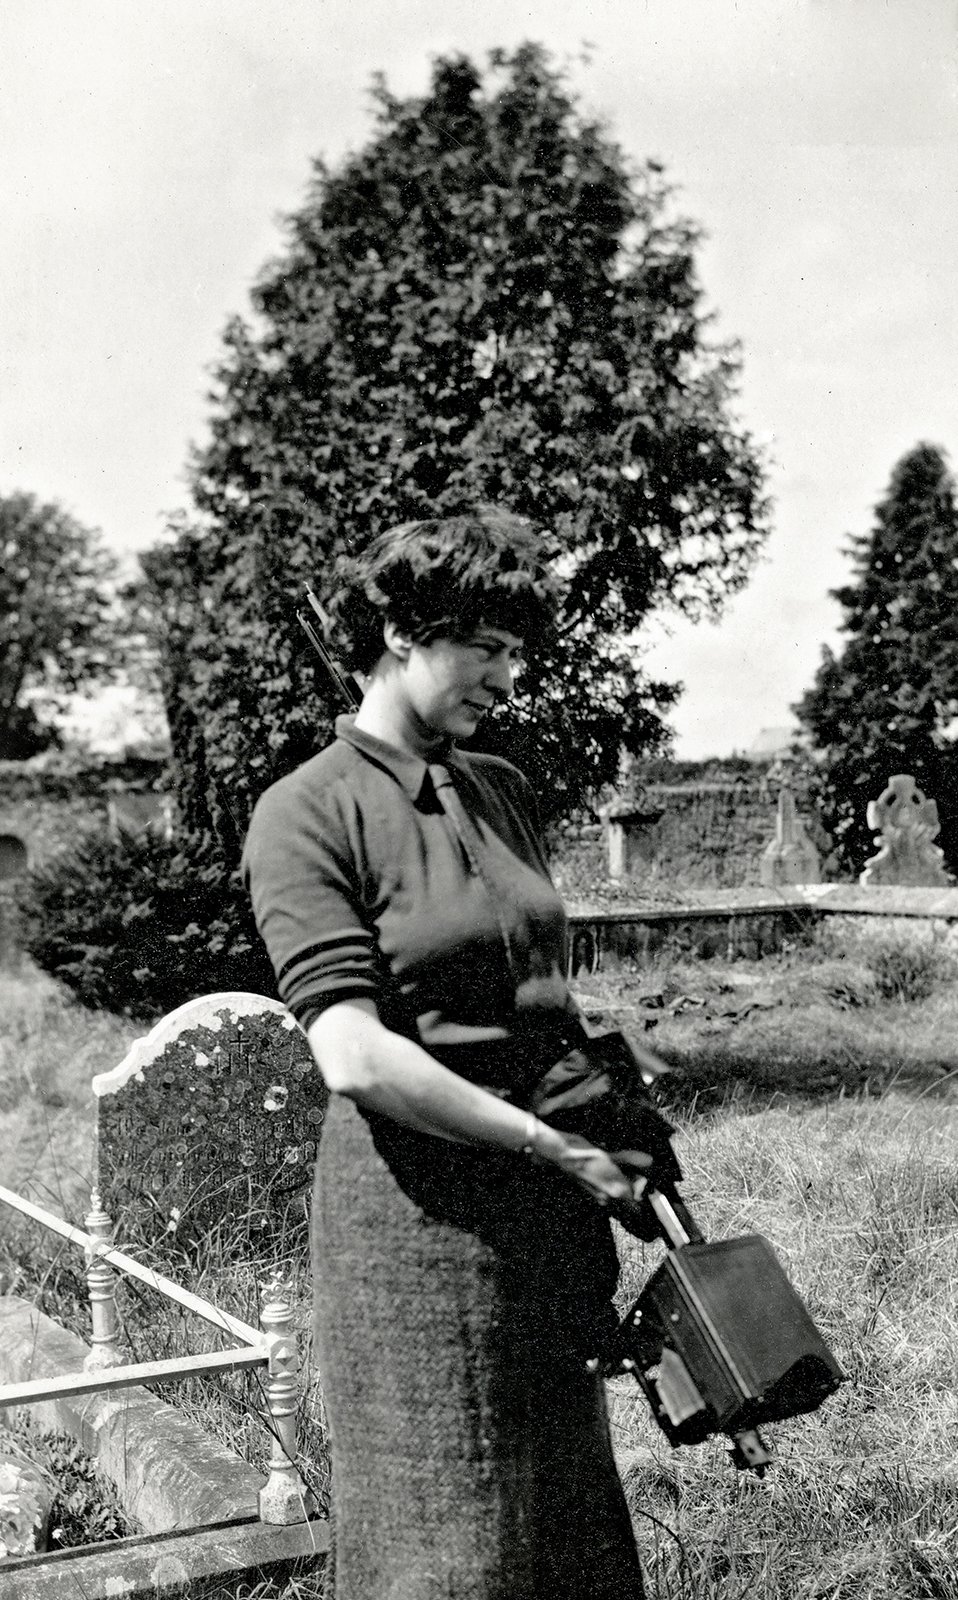 Helen Hooker O'Malley with camera on one of her photographic trips around Ireland, 1938.